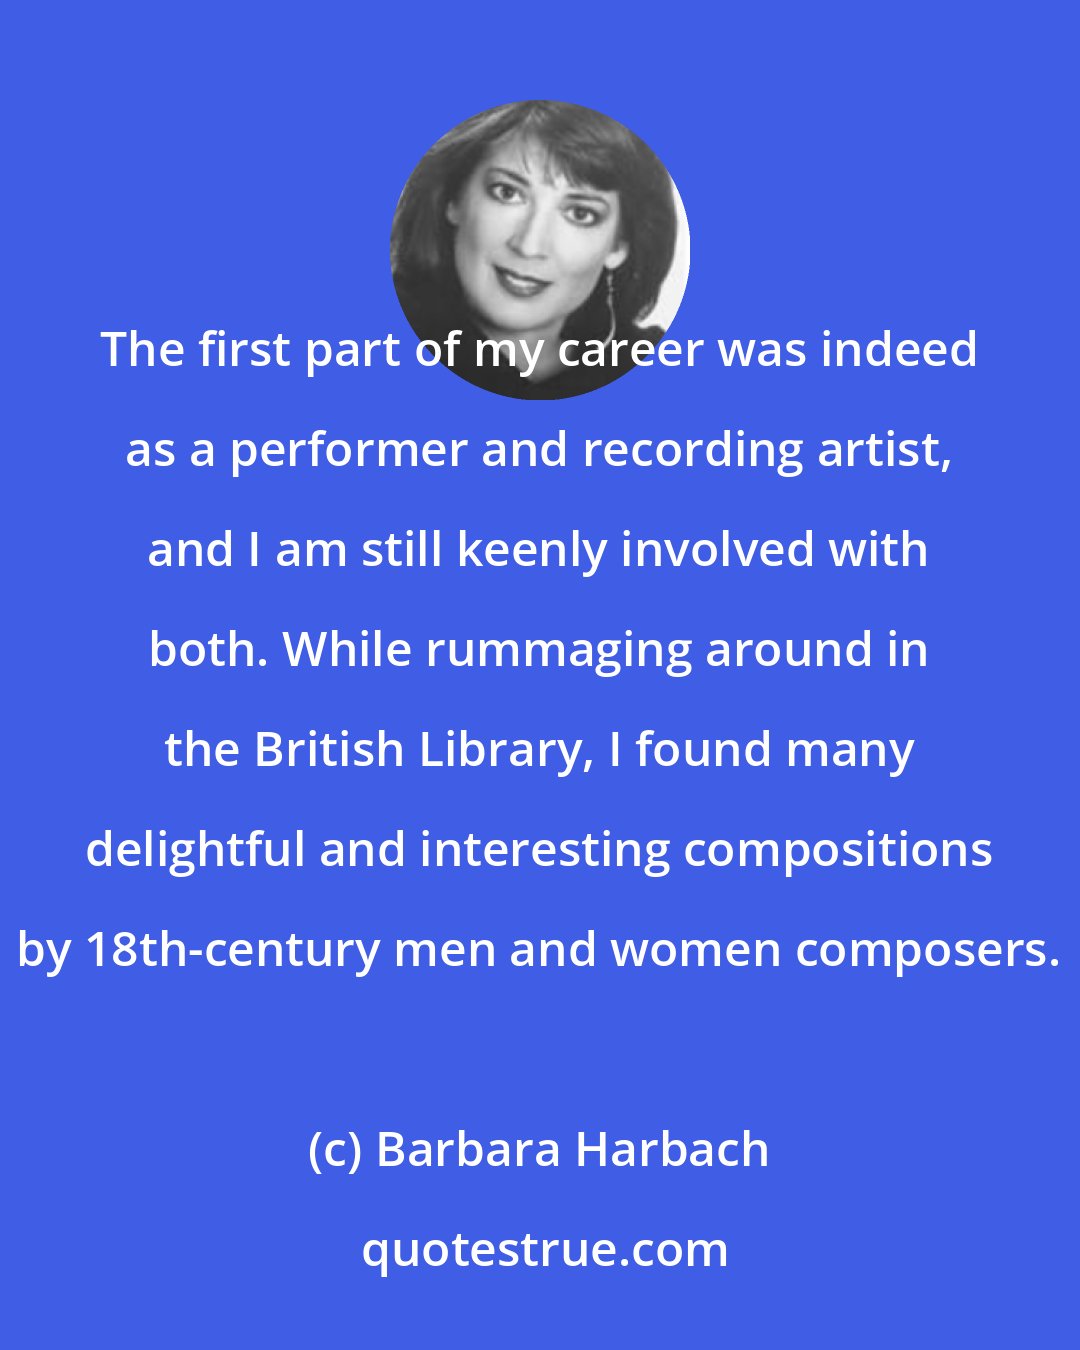 Barbara Harbach: The first part of my career was indeed as a performer and recording artist, and I am still keenly involved with both. While rummaging around in the British Library, I found many delightful and interesting compositions by 18th-century men and women composers.